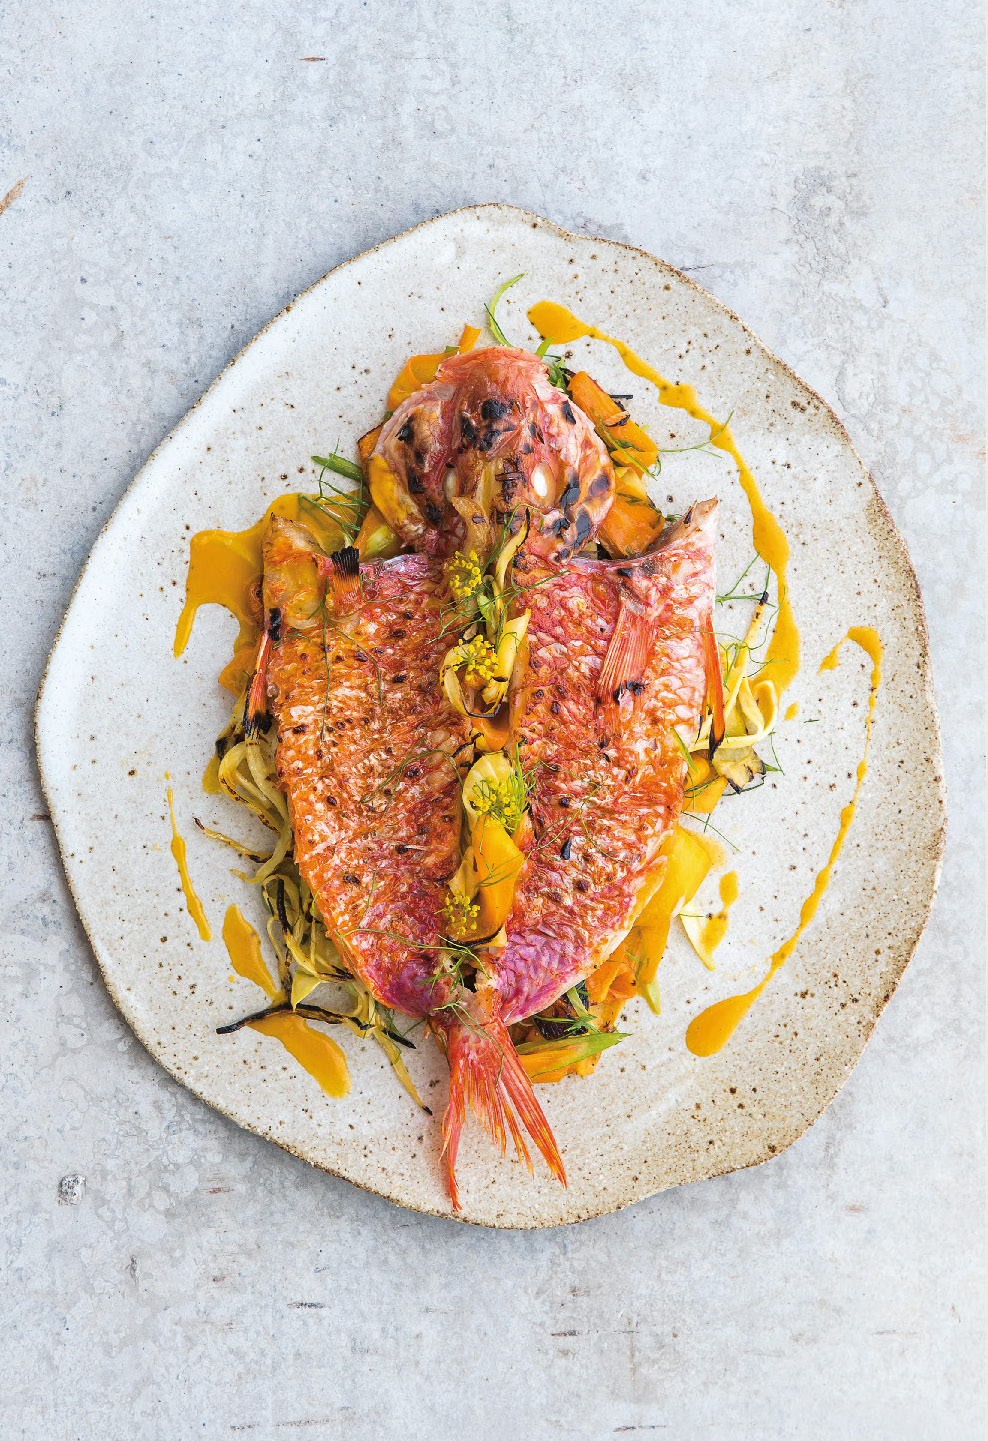 Red mullet, escabeche